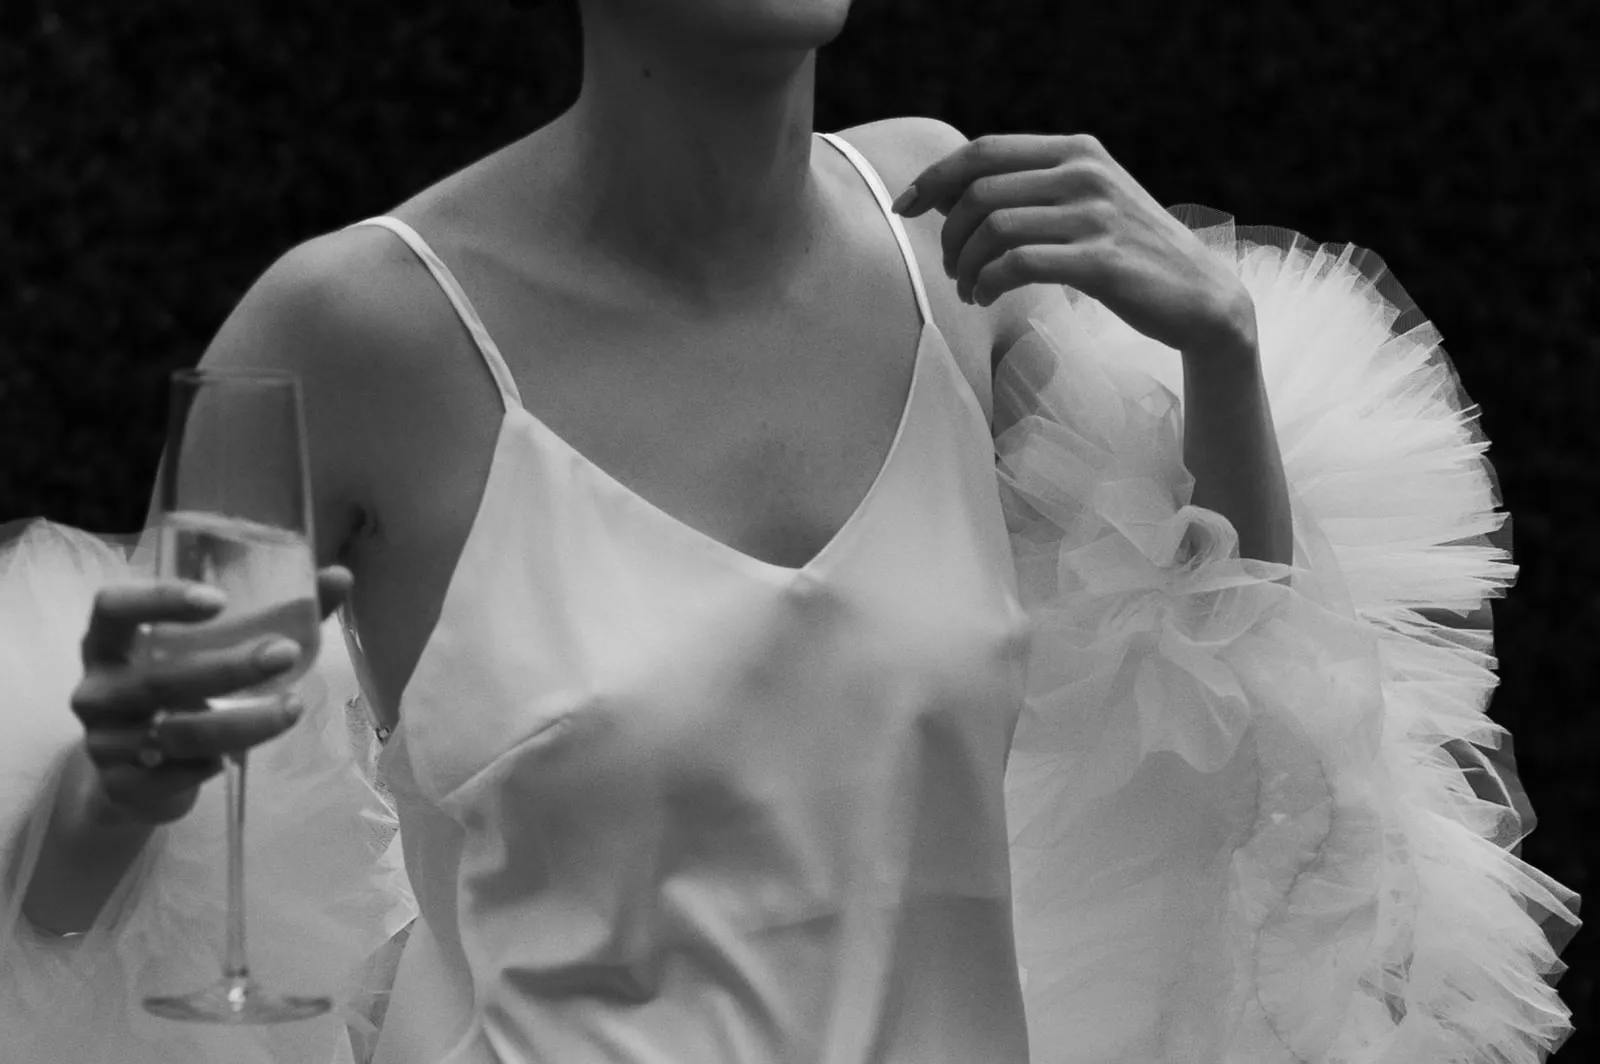 A black and white photograph of a person wearing a delicate, strappy dress with ruffled tulle sleeves. The person is holding a champagne flute in their right hand, and their left hand is raised, touching their shoulder. The background is dark and out of focus.